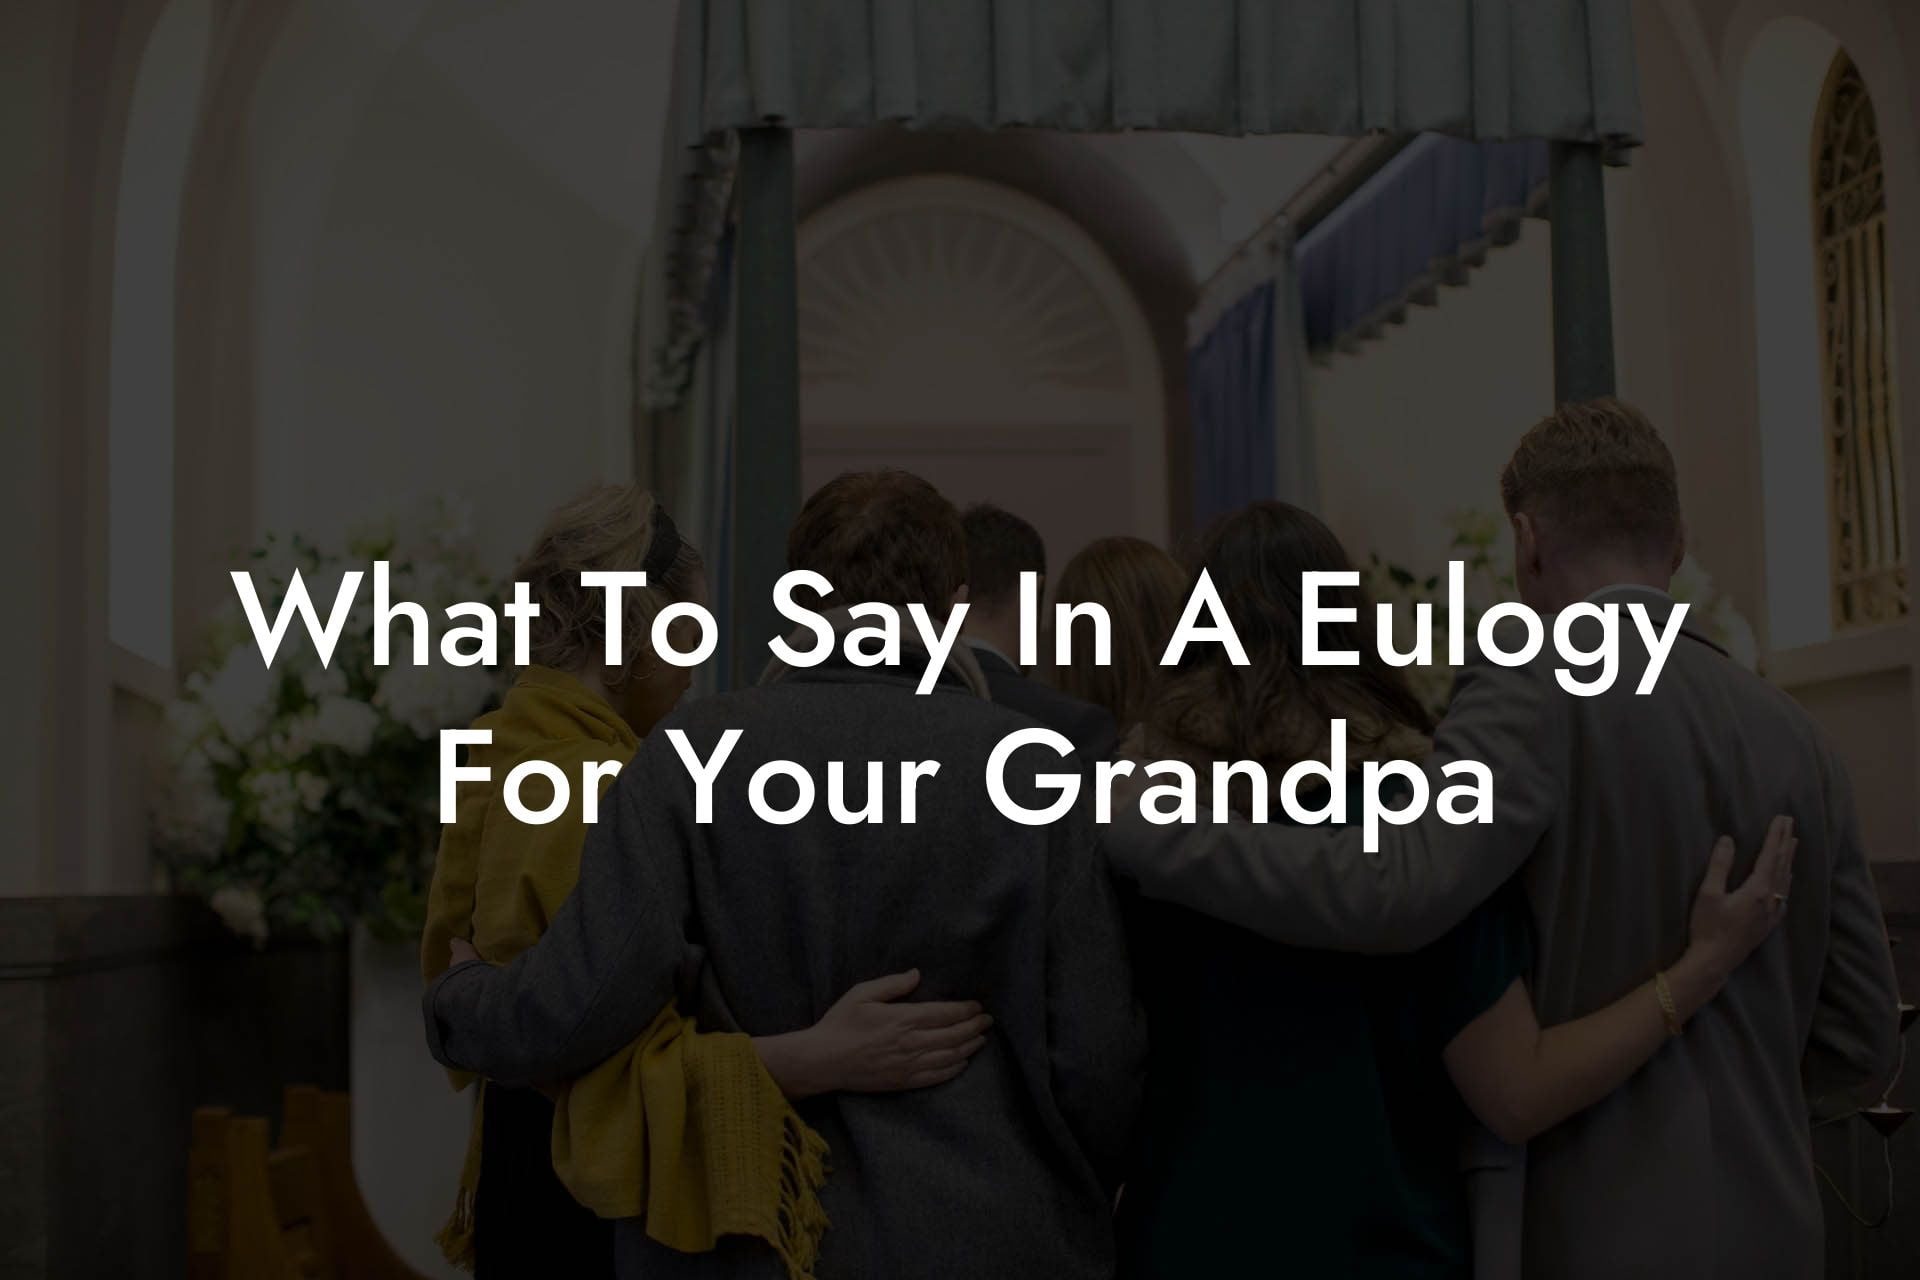 What To Say In A Eulogy For Your Grandpa